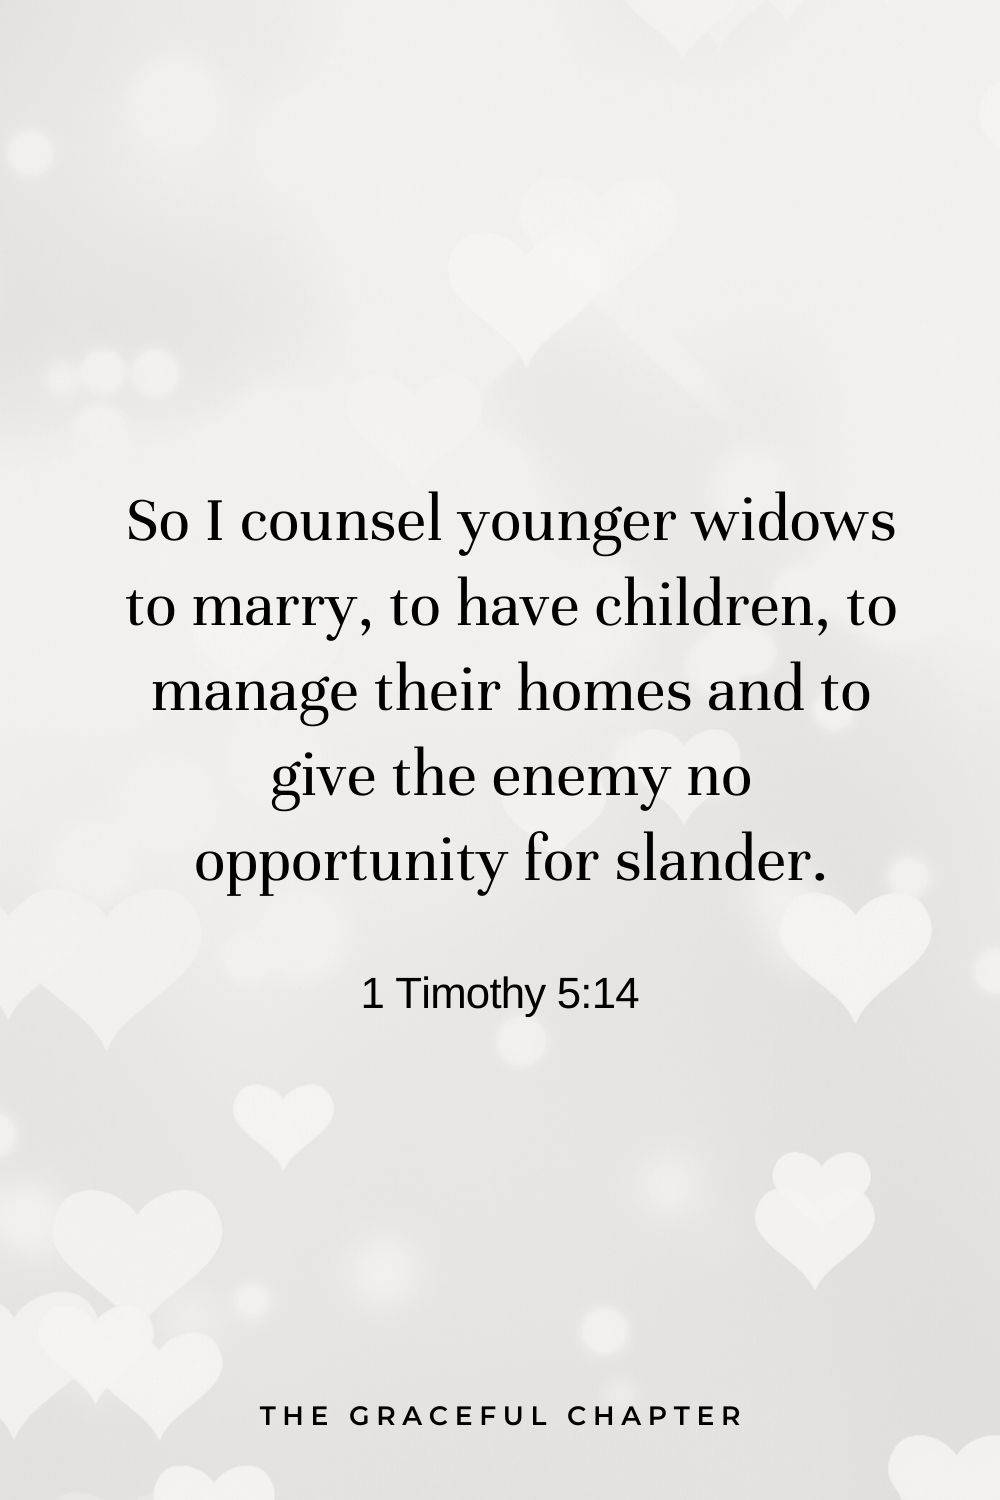 So I counsel younger widows to marry, to have children, to manage their homes and to give the enemy no opportunity for slander. 1 Timothy 5:14